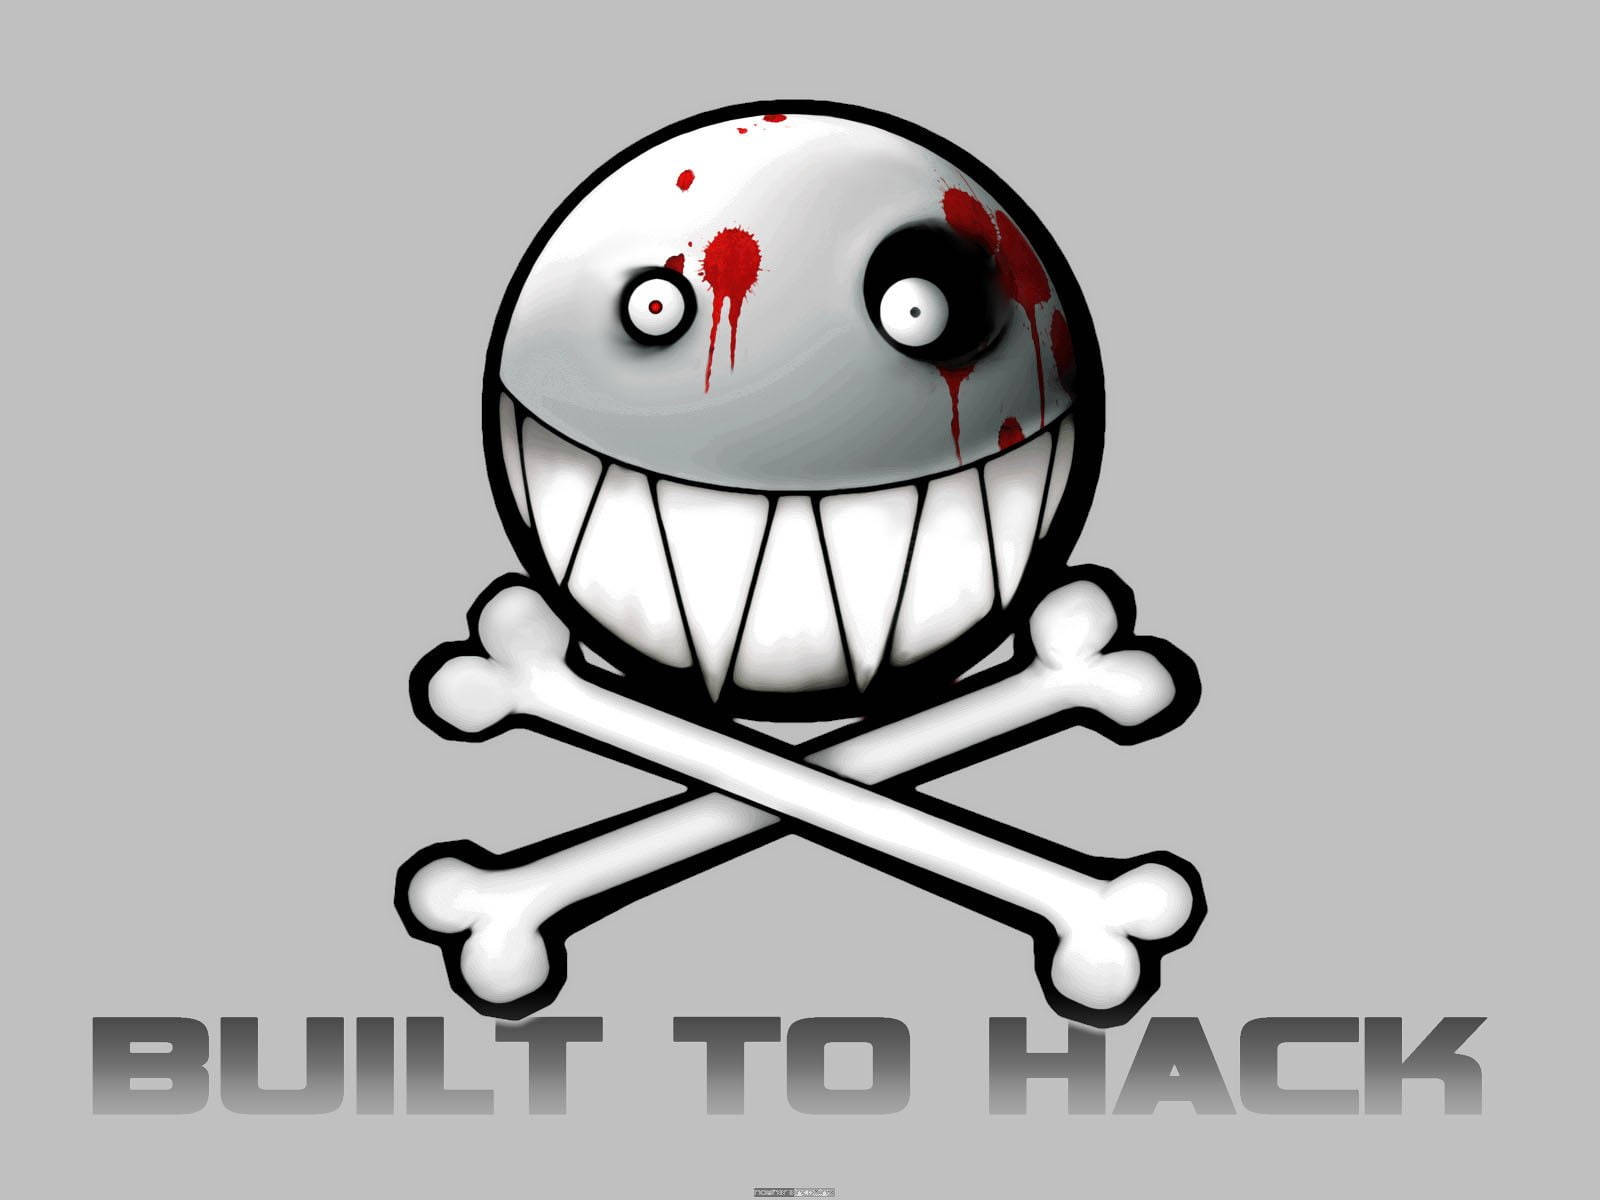 Bloody Smiley Face Hacker Logo Background